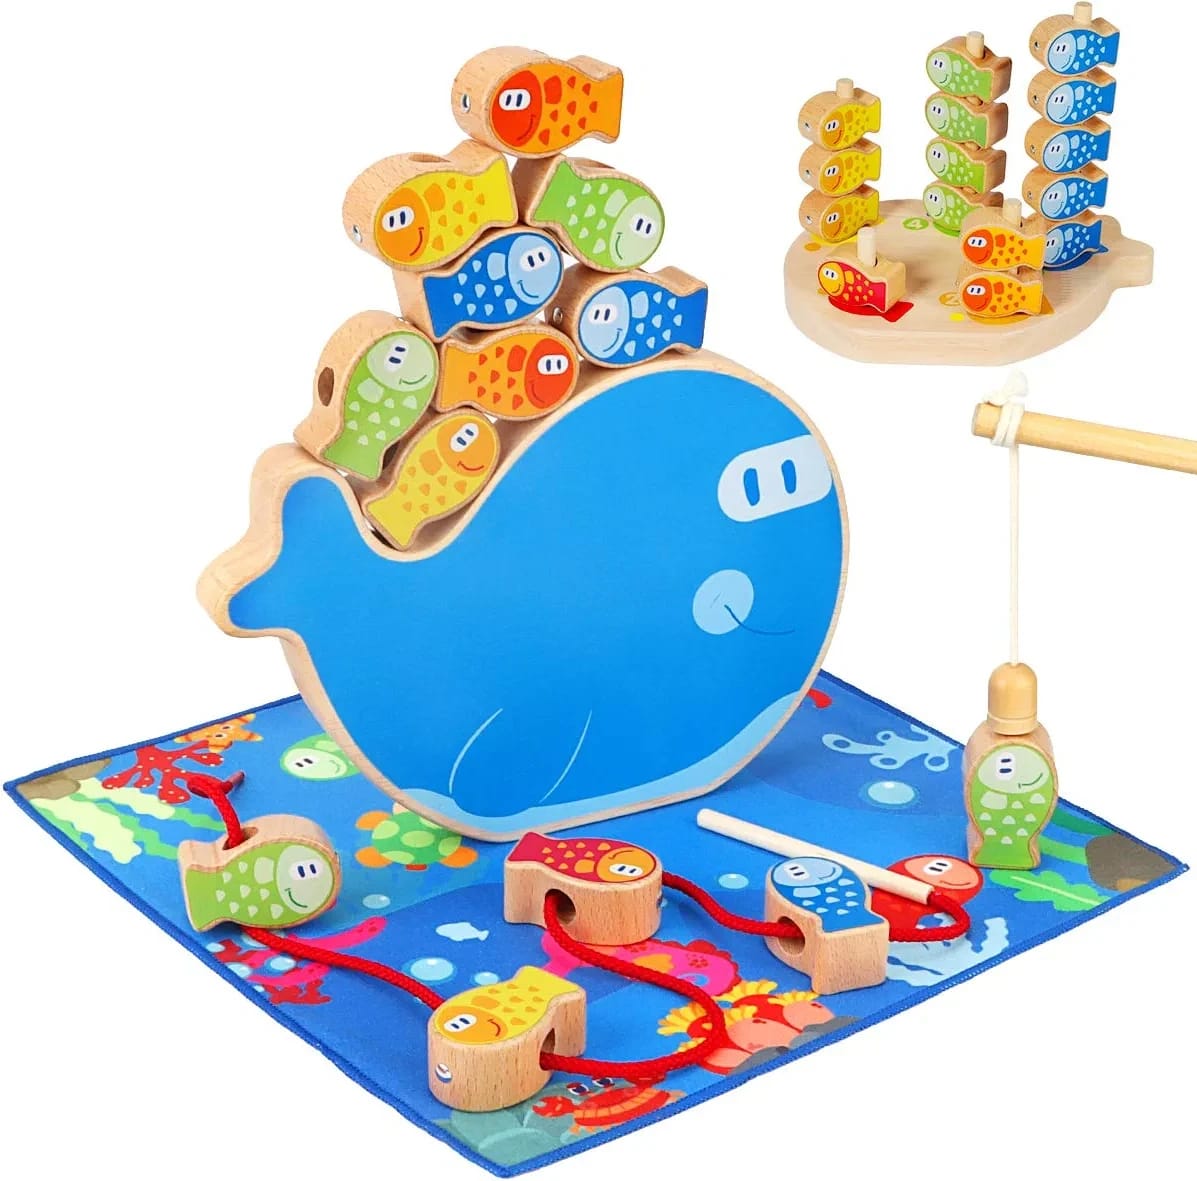 Wooden Magnetic Fishing Game 4 in 1 Sorting & Stacking Fine Motor Skills Toys for Kids Learning